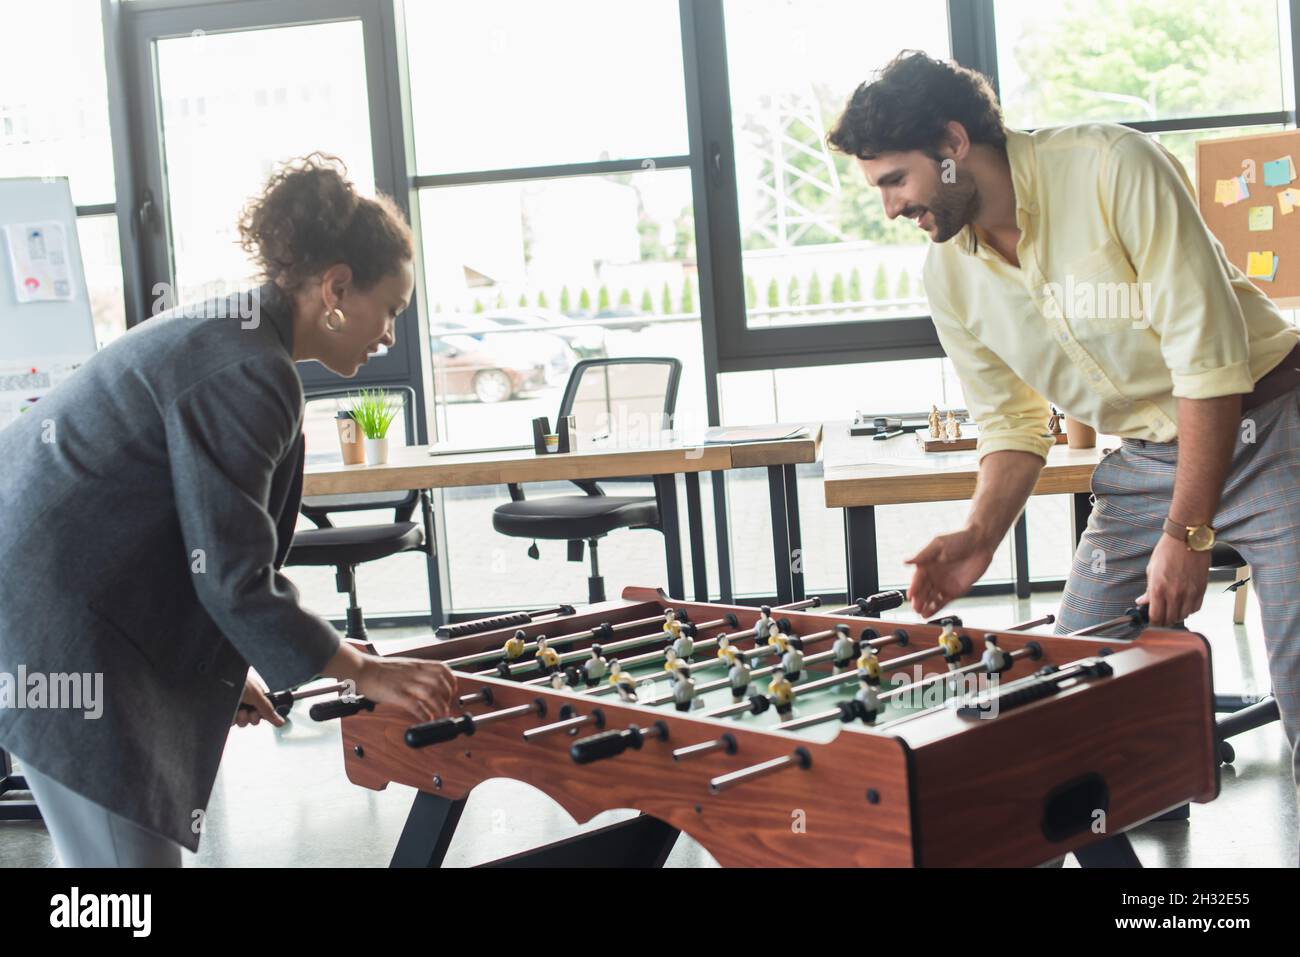 https://c8.alamy.com/comp/2H32E55/side-view-of-interracial-business-people-playing-table-football-in-office-2H32E55.jpg